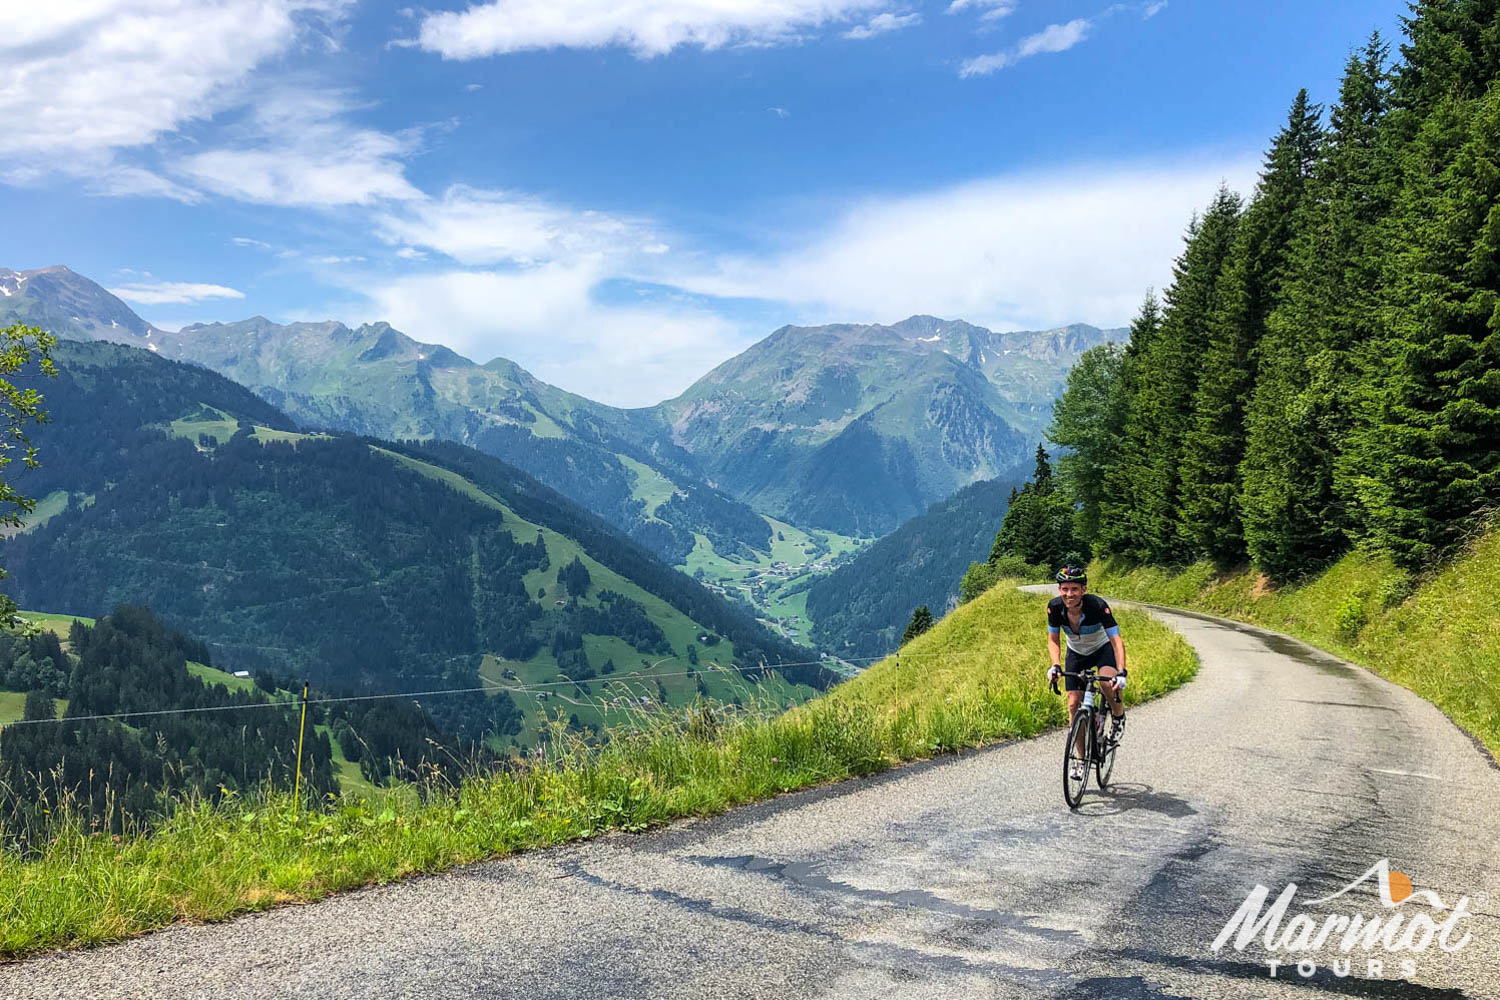 Cyclist climbing in French Alps on Marmot Tours fully supported road cycling holiday challenge